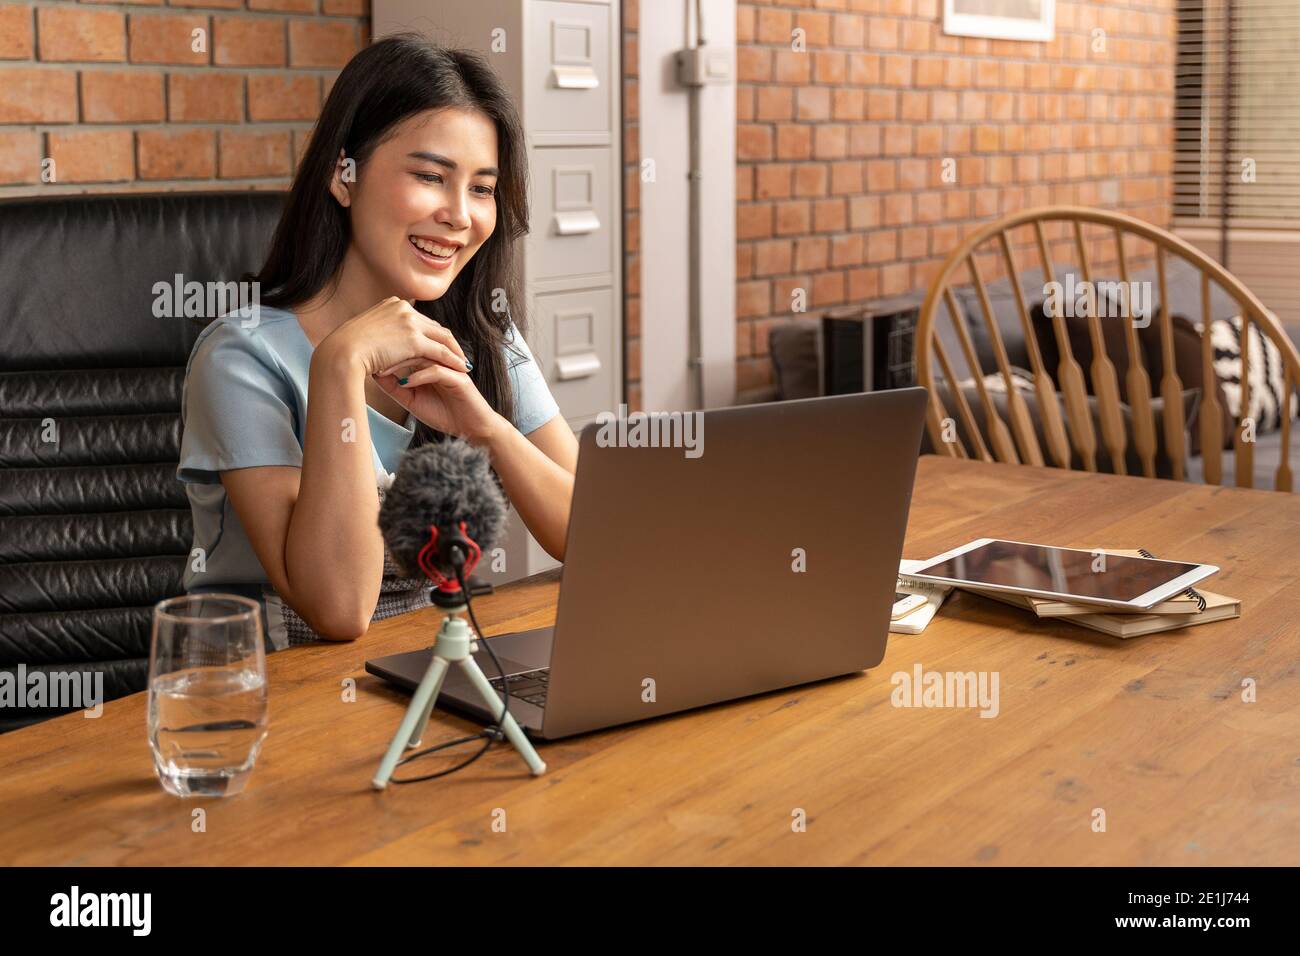 Happy young attractive woman working or learning online through her laptop computer at home in her living room during the pandamic lockdown, distant l Stock Photo